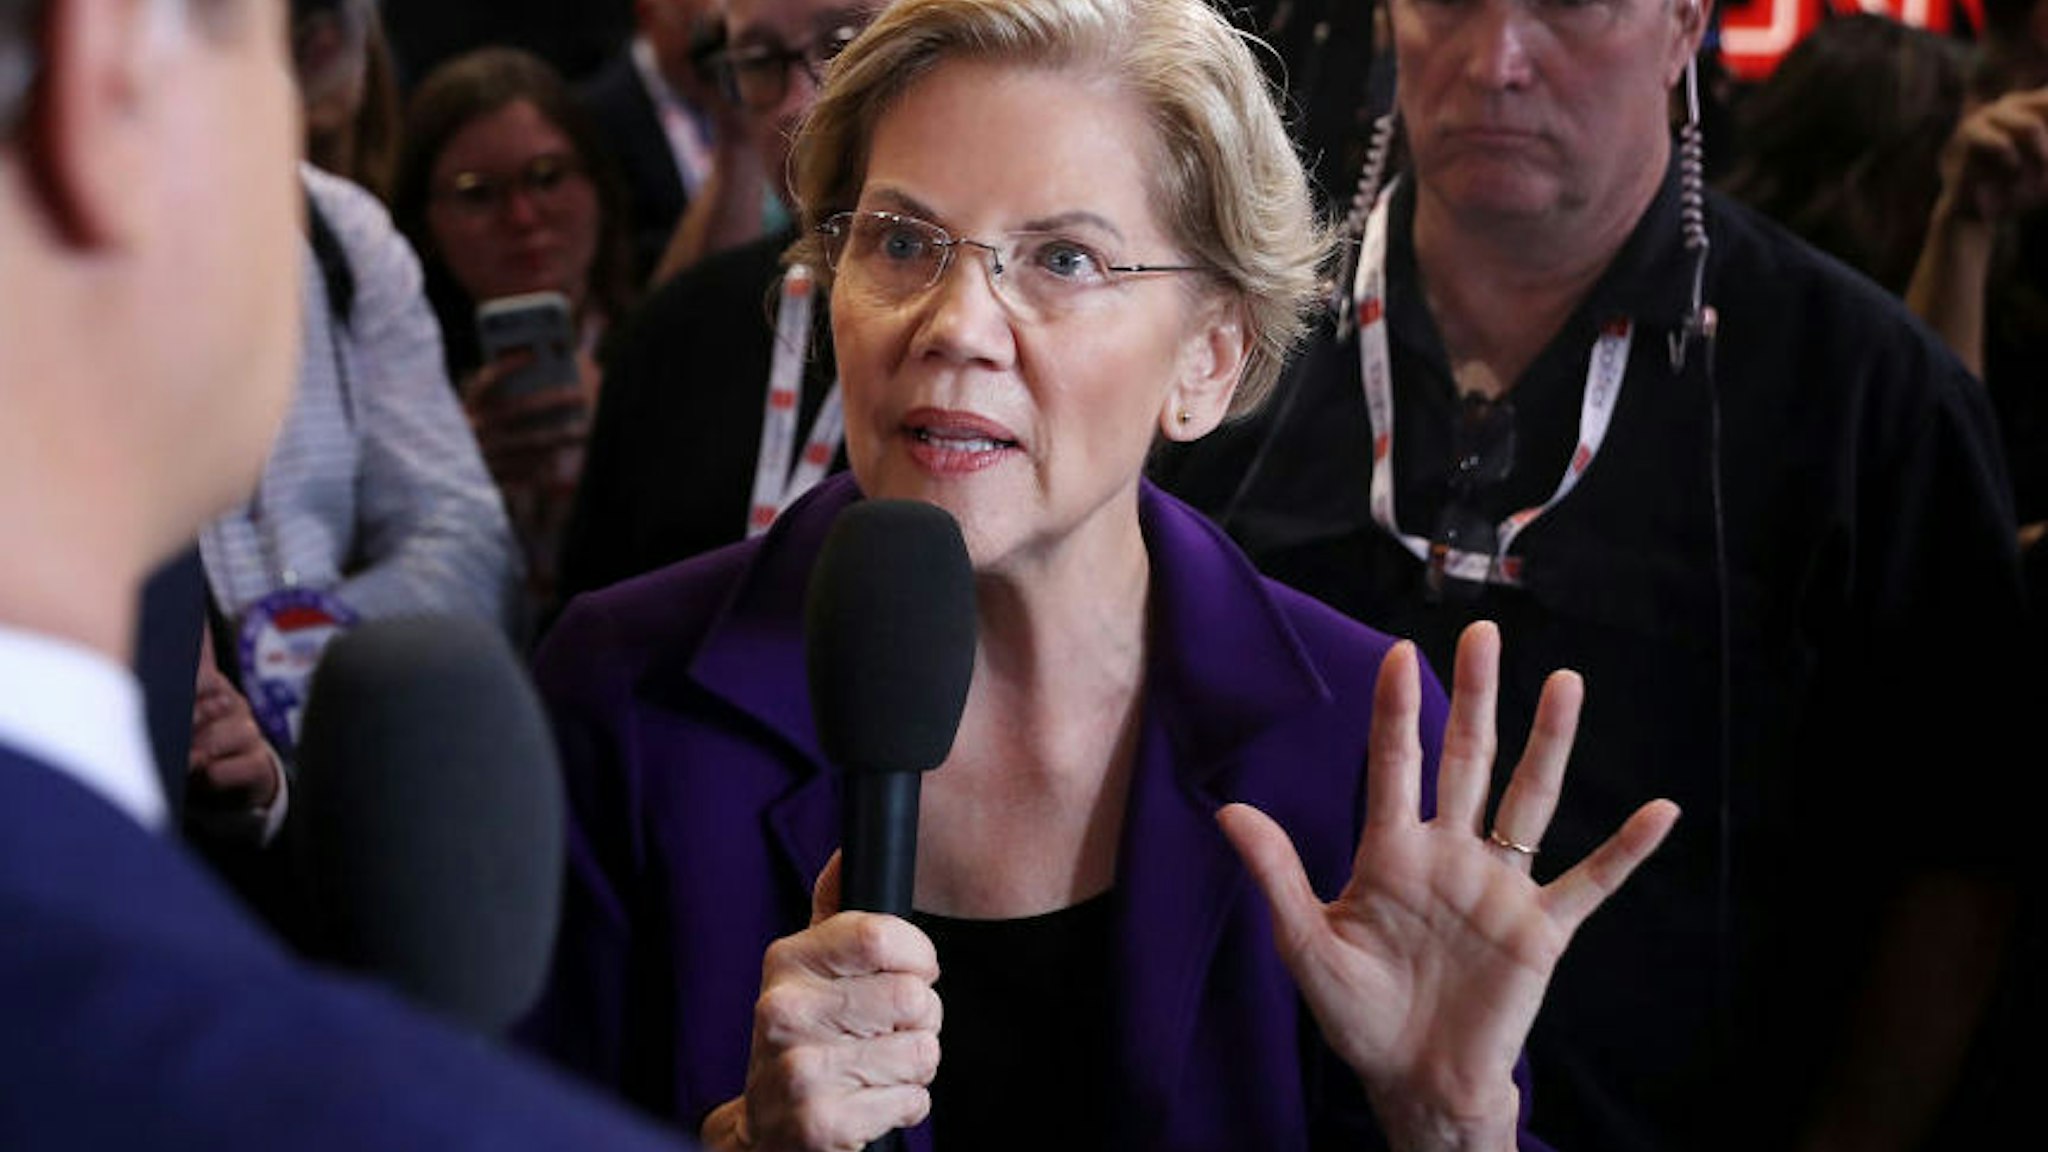 WESTERVILLE, OHIO - OCTOBER 15: Presidential candidate Sen. Elizabeth Warren (D-MA) talks with MSNBC host Chris Hays in the Spin Room following the fourth Democratic presidential debate in the Clements Recreation Center at Otterbein University October 15, 2019 in Westerville, Ohio. A record 12 presidential hopefuls are participating in the debate hosted by CNN and The New York Times.